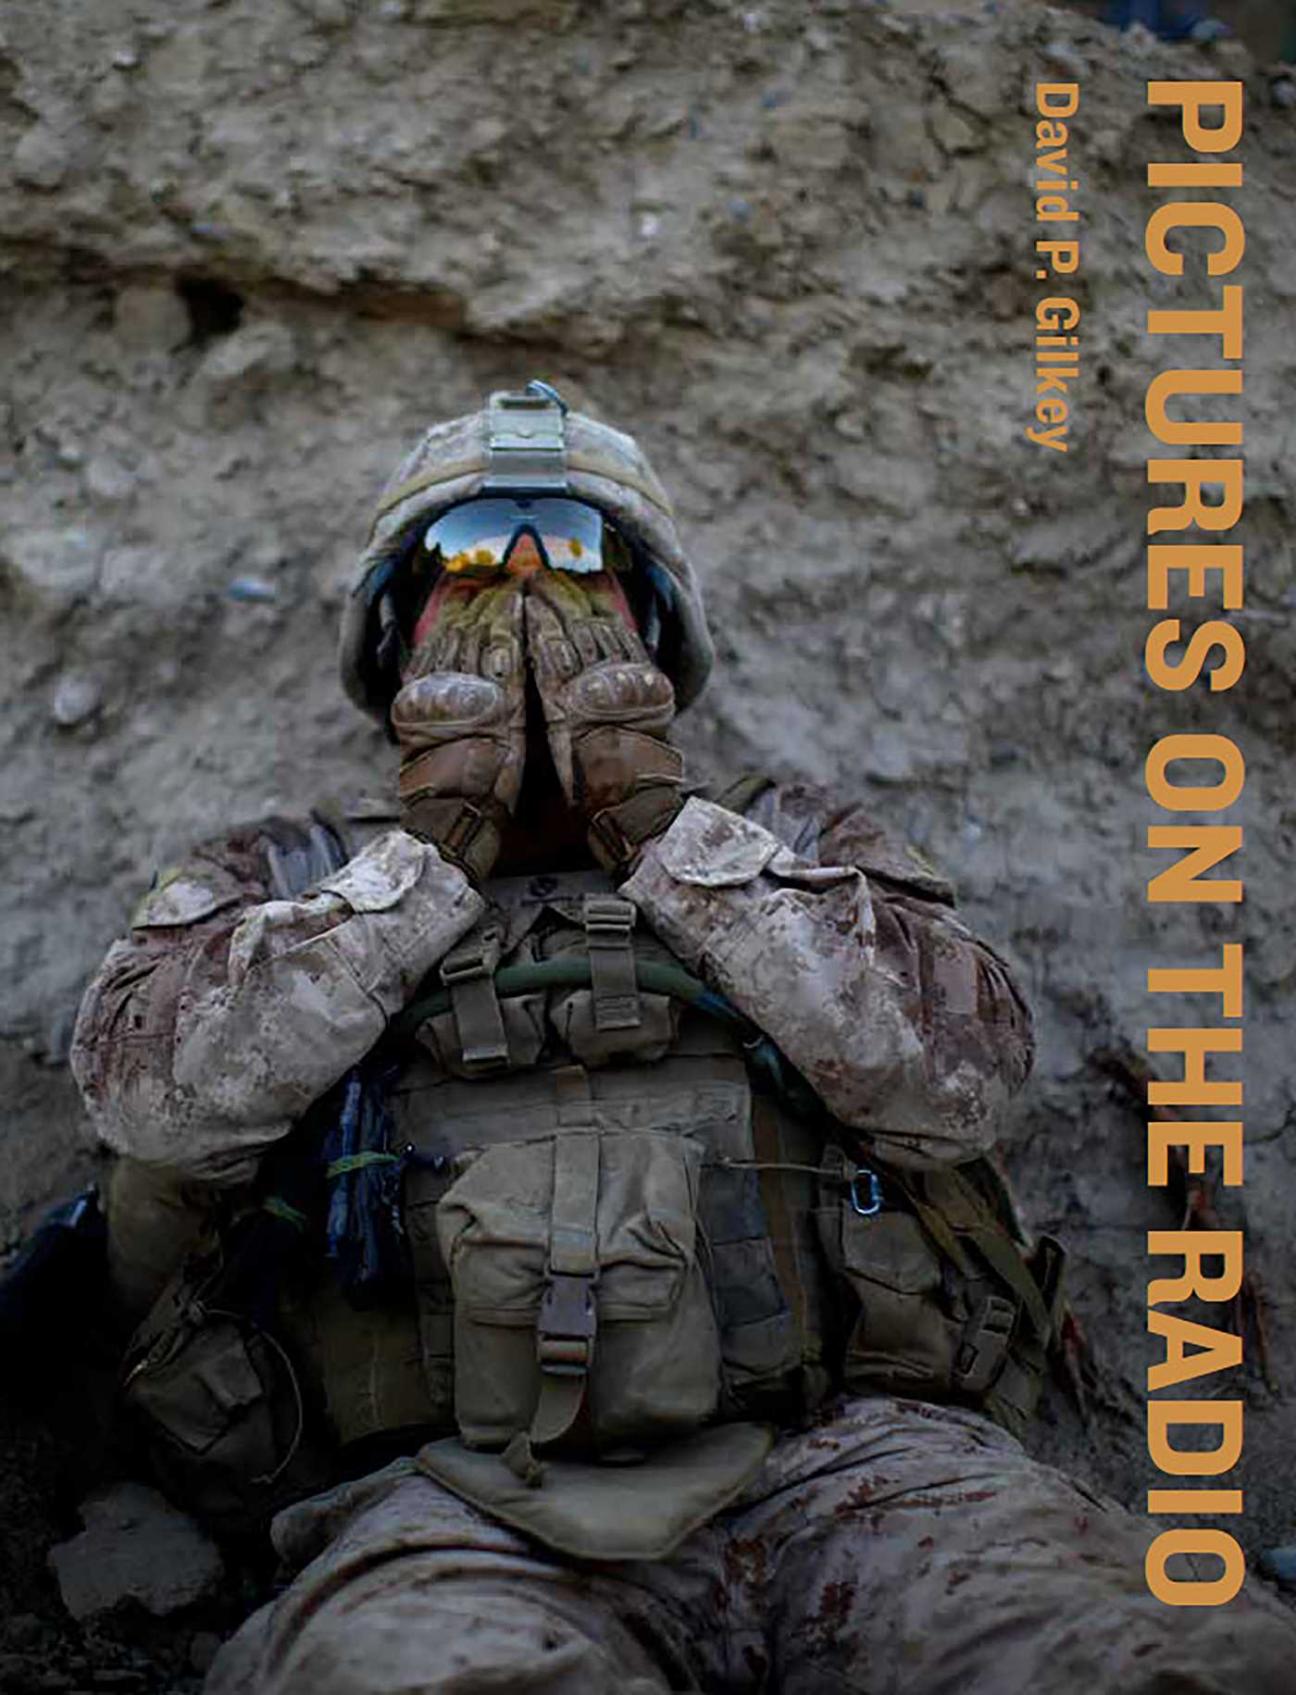 The cover of "Pictures on the Radio" by David Gilkey, which has a photo of a person in heavy military gear leaning against a dirt wall with their hands on their face. The title is down the side in a light orange.